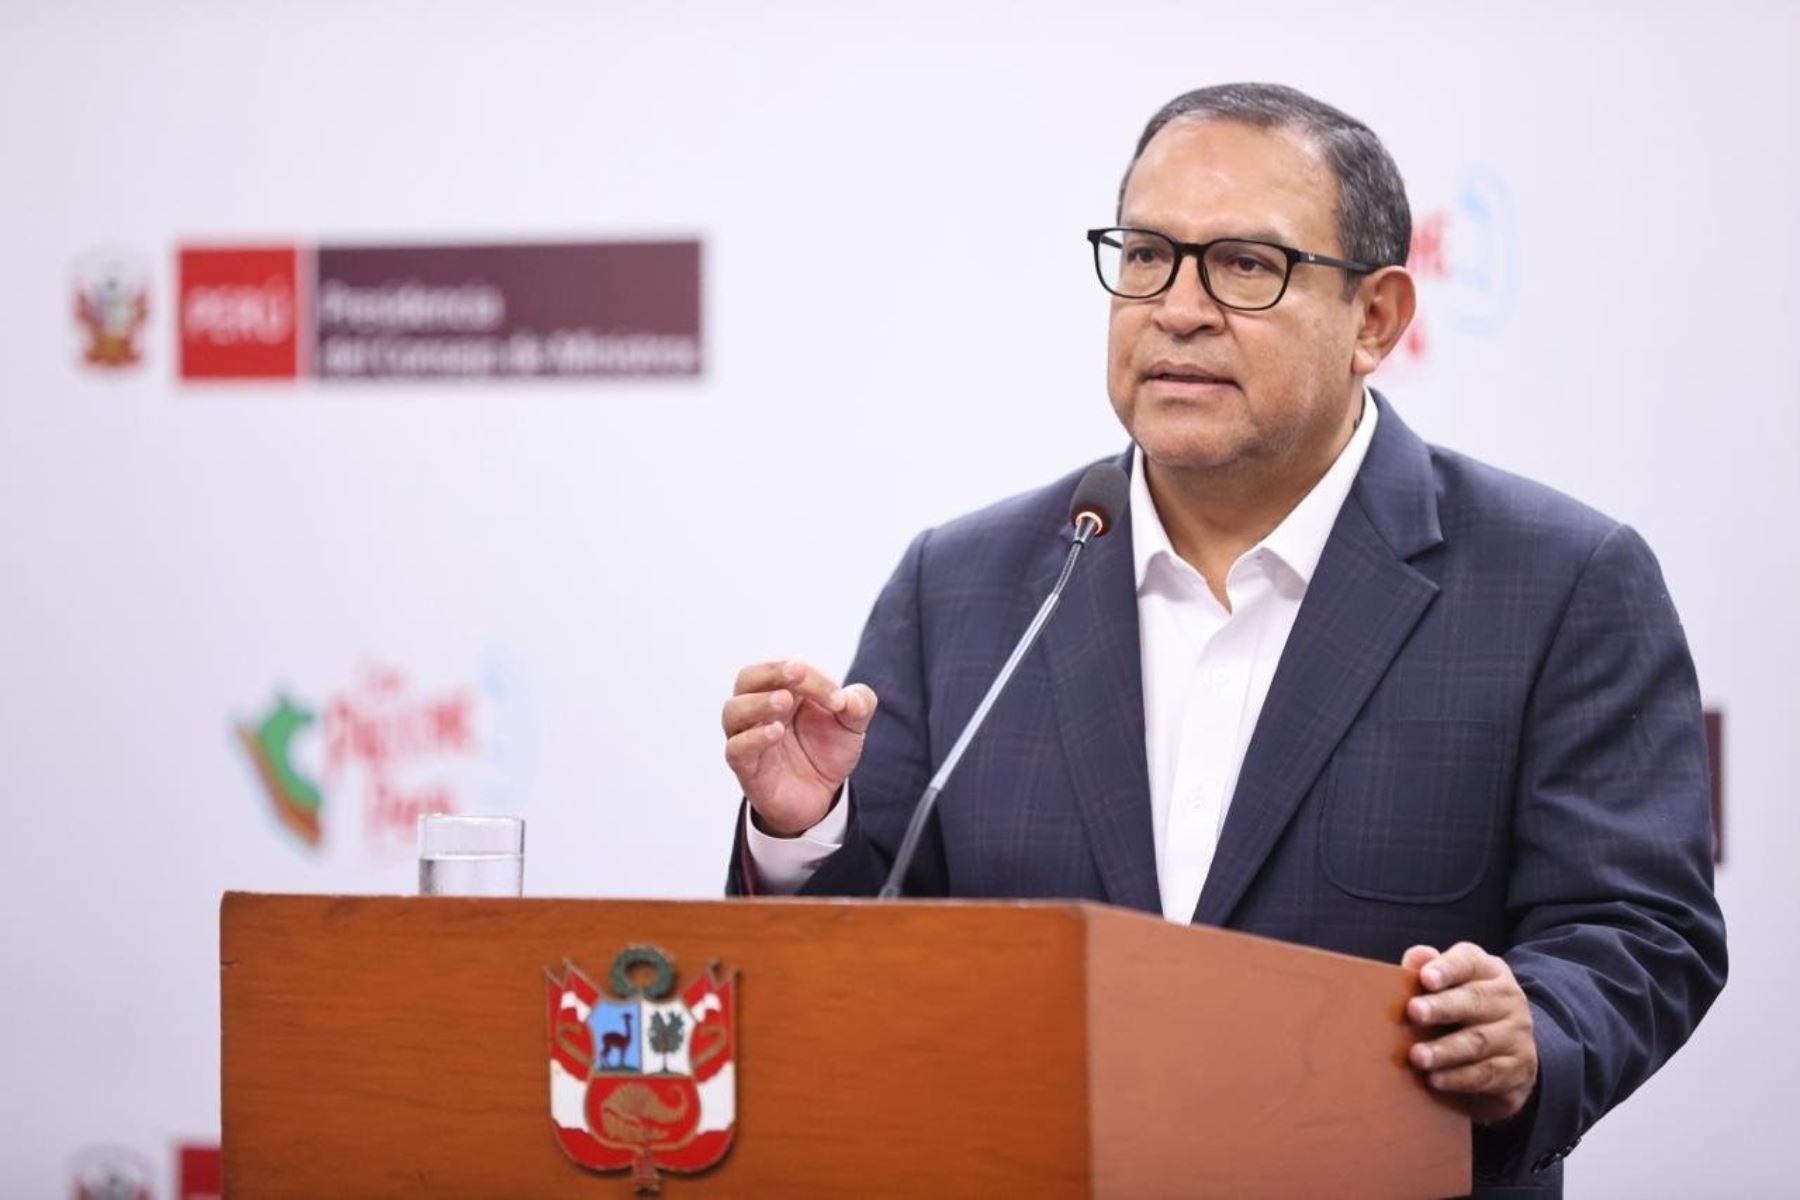 Photo: Presidency of the Council of Ministers of Peru